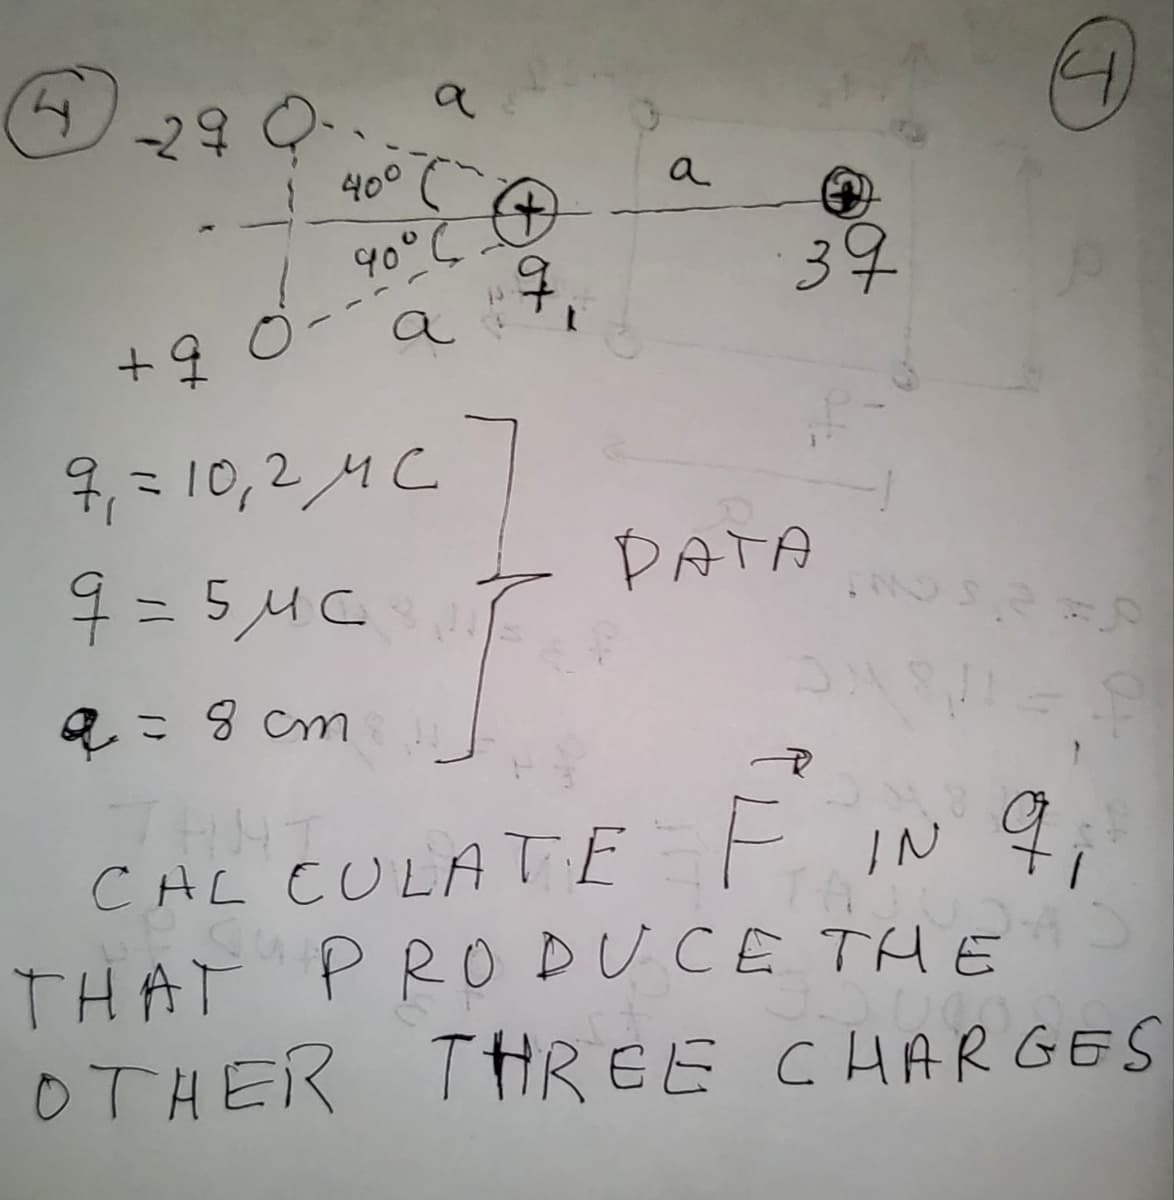 a
400
a
40° 6
7.
39
a
9 = 10, 2 MC
9 = 5 Mc
PATA
a= 8 cm
CAL CULATE
E IN 4
THAT PRO DUCE THE
43
OTHER TREE CHARGES
